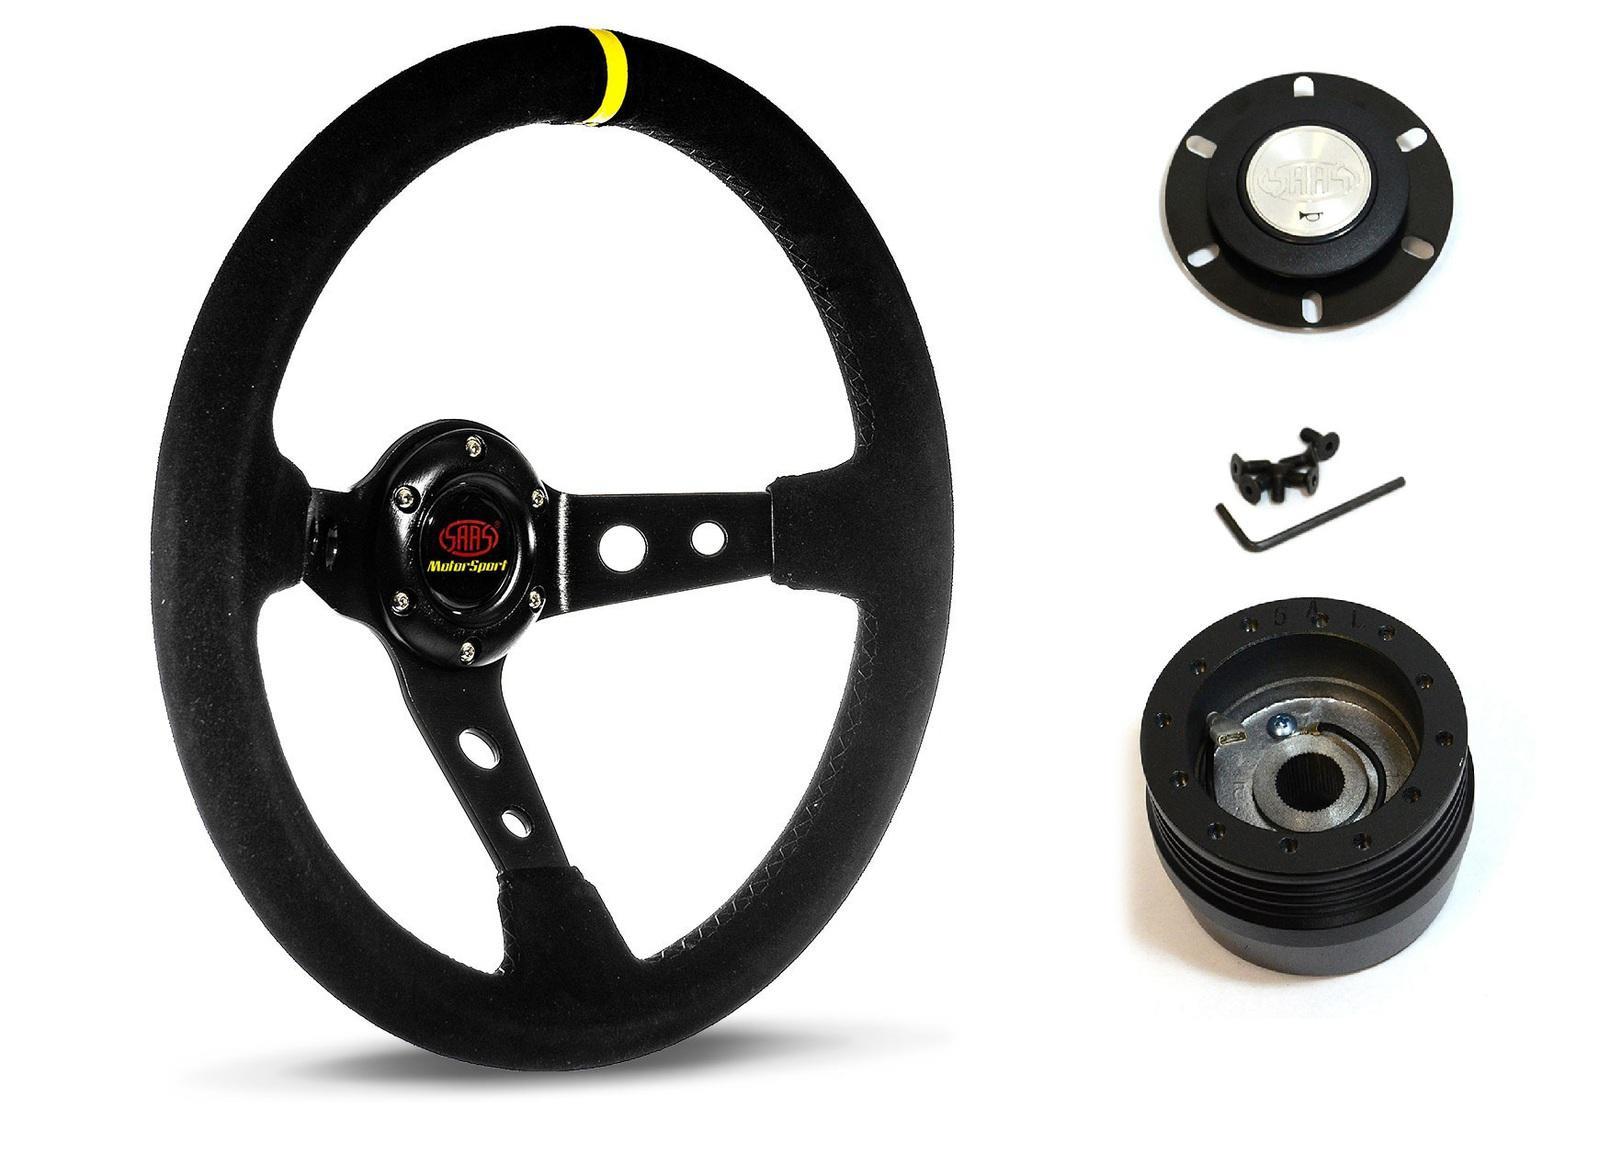 SAAS Steering Wheel Suede 14" ADR GT Deep Dish Black With Holes + Indicator SWGT1 and SAAS boss kit for Mitsubishi Scorpion GJ GK GL 1980-1985